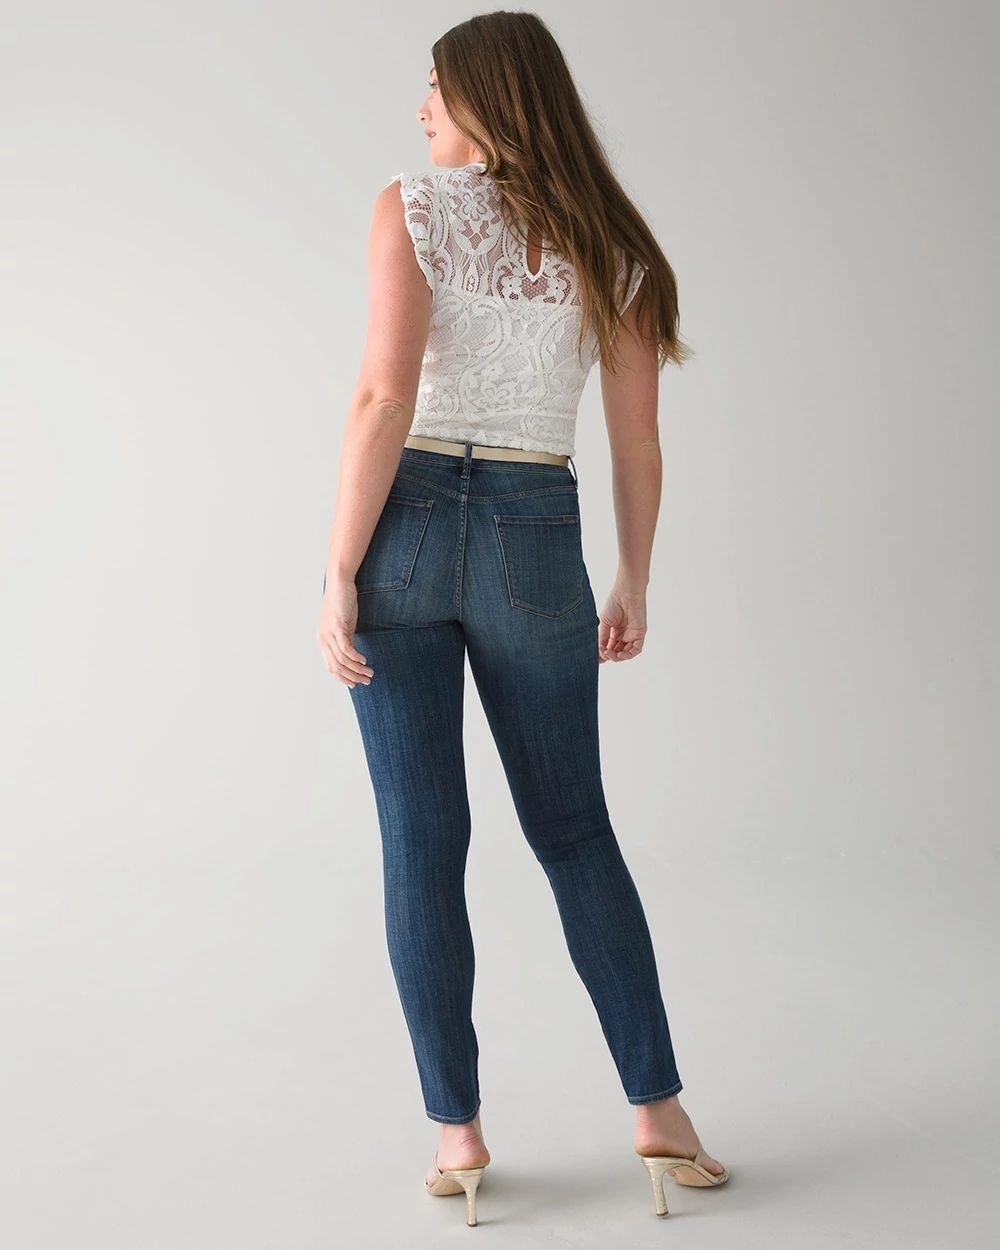 Curvy-Fit Everyday Soft Denim  Extra High-Rise Skinny Jeans click to view larger image.